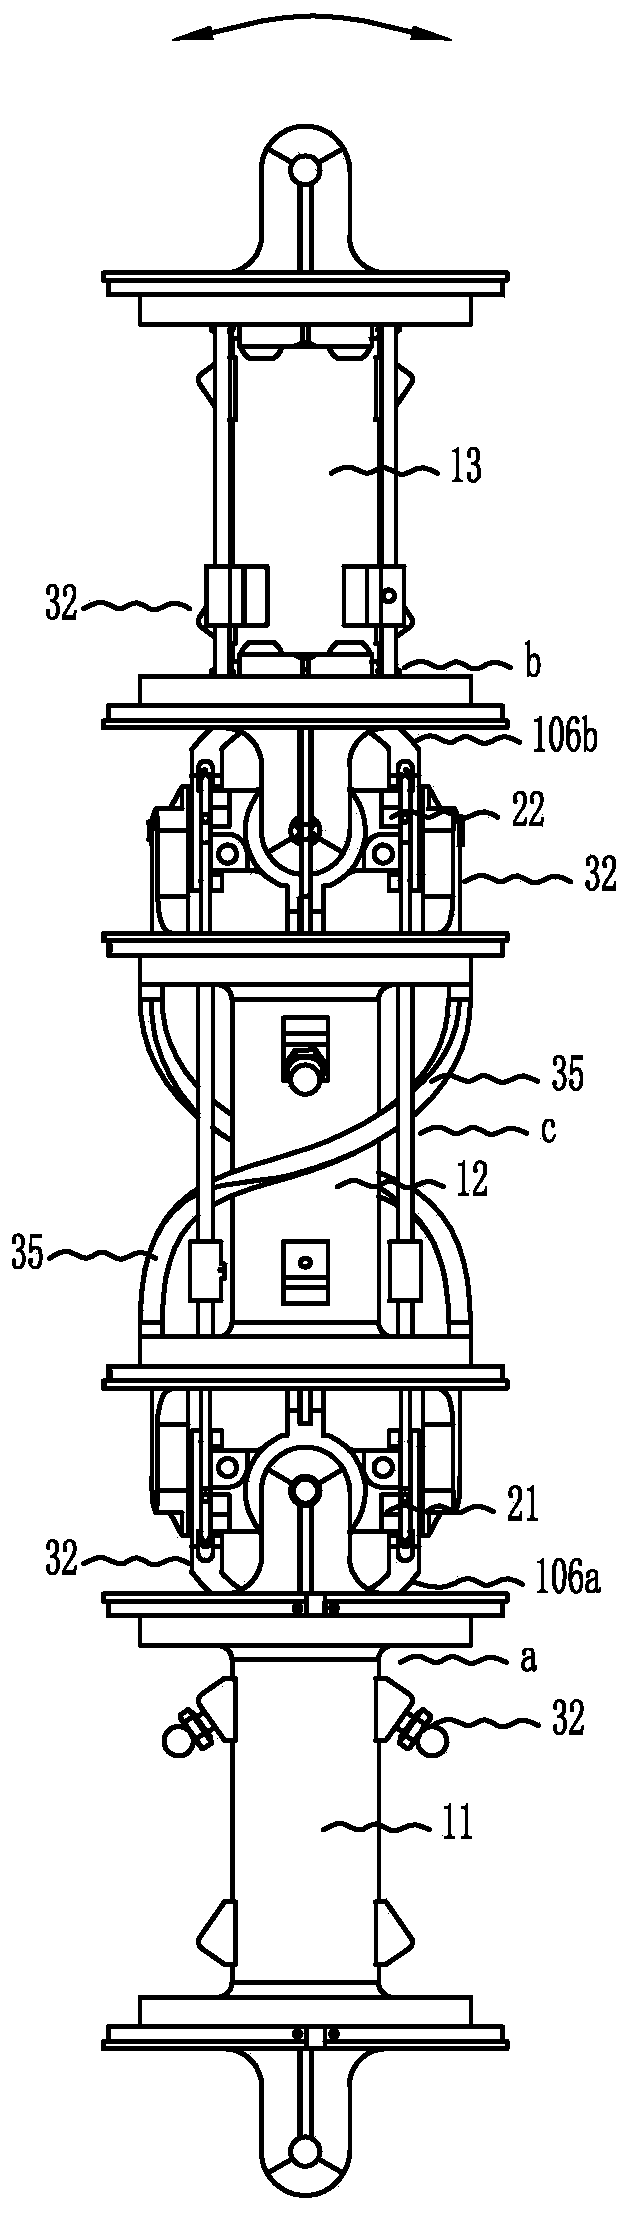 A linkage joint group and a mechanical arm